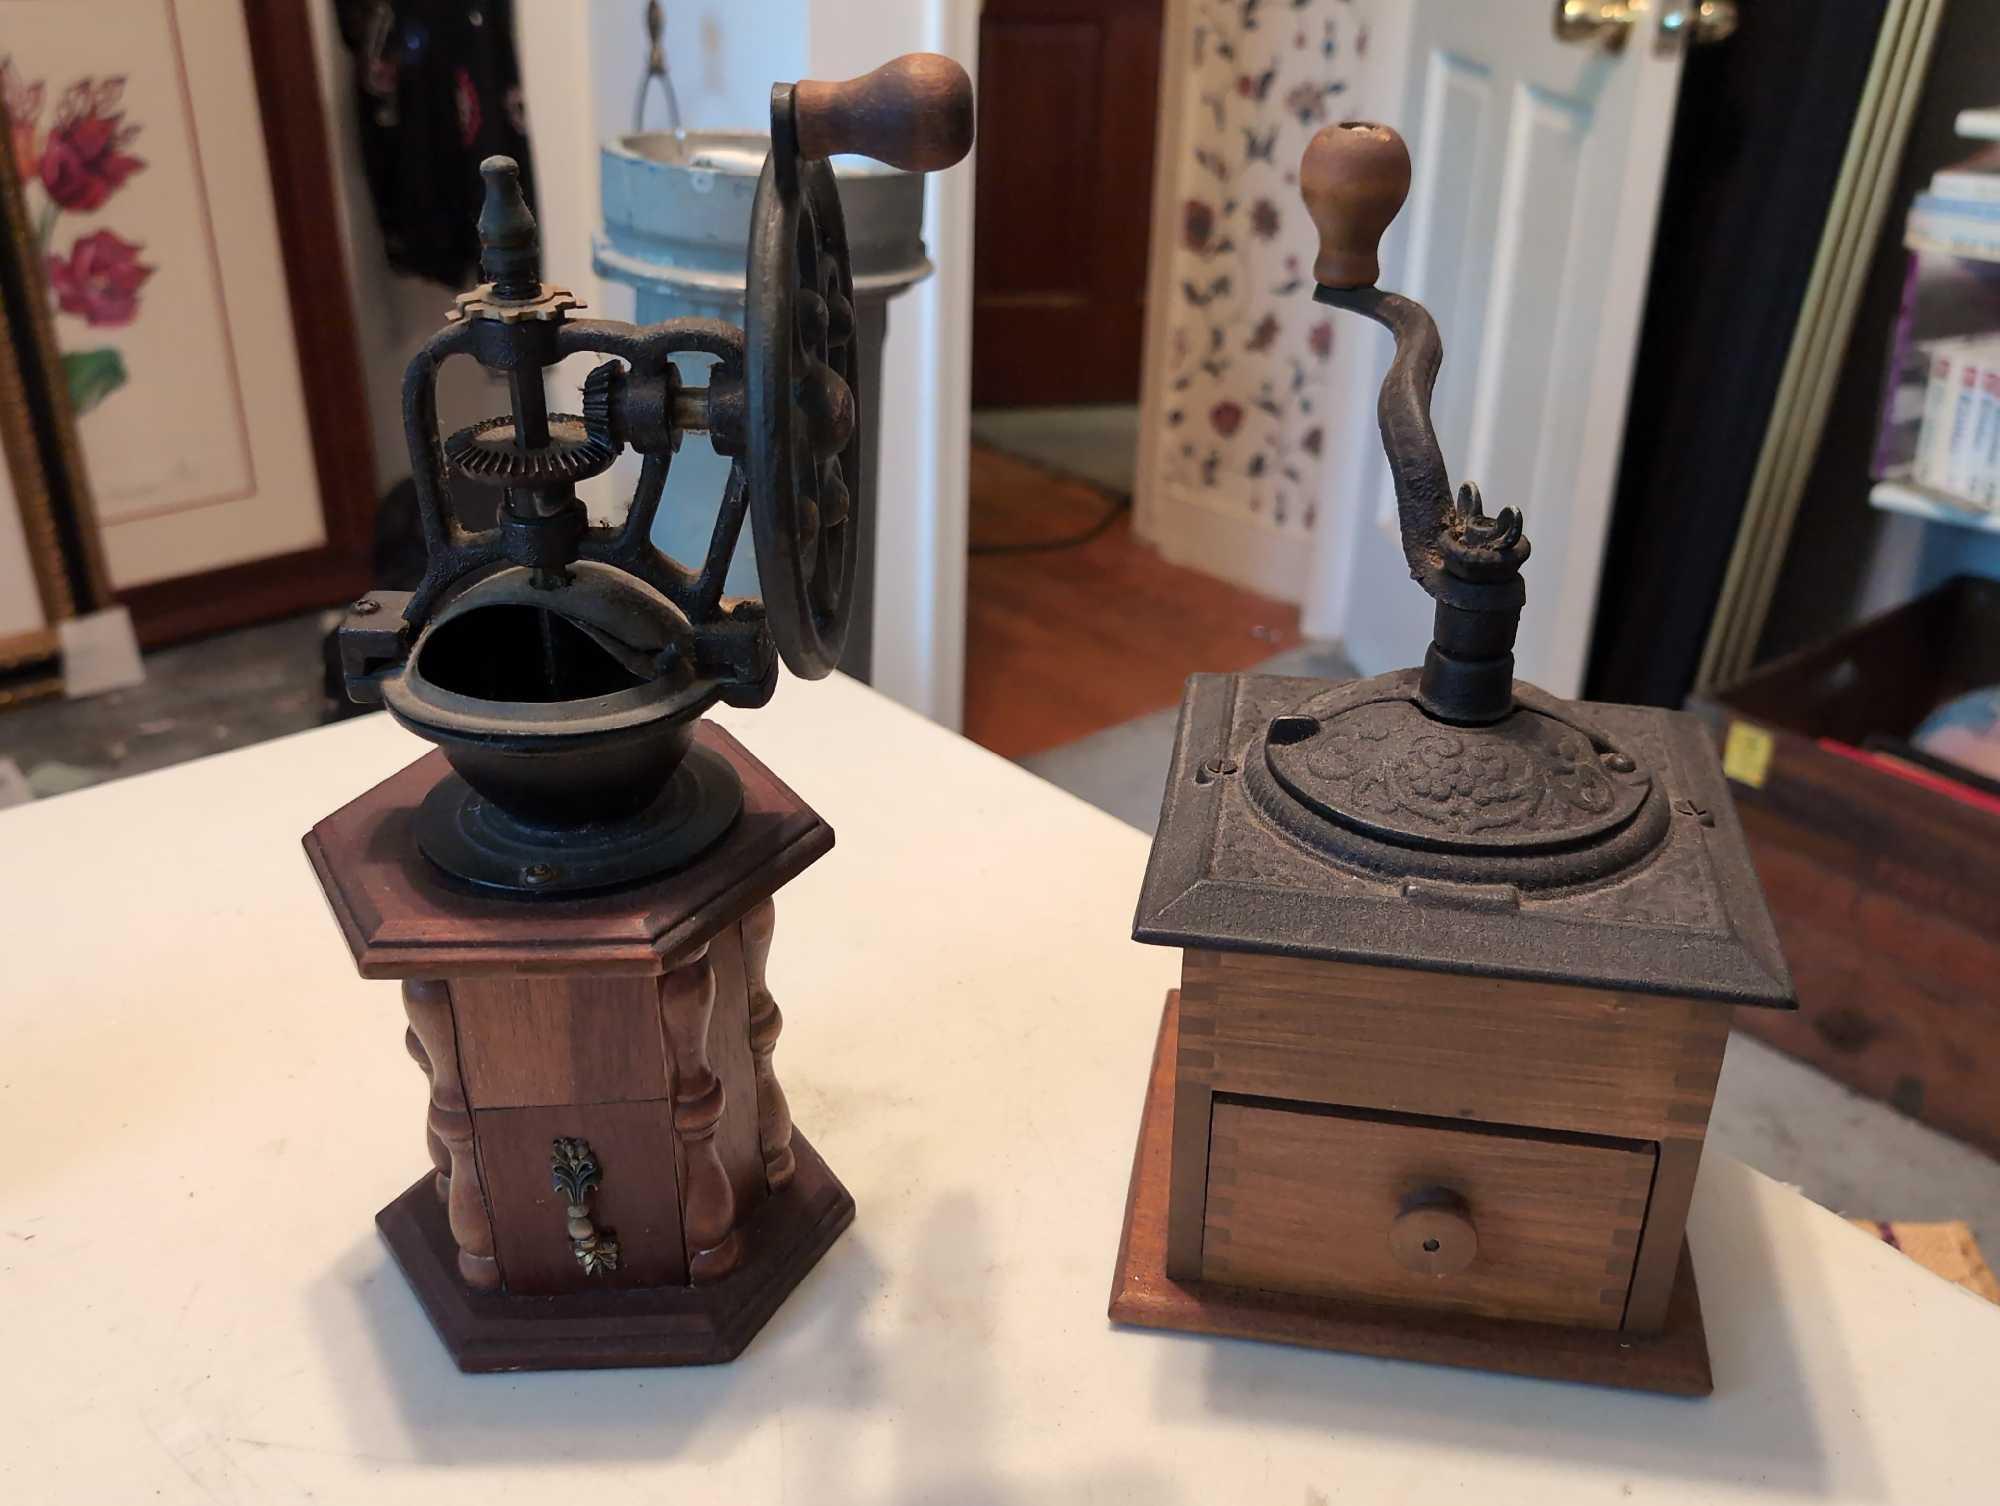 (BR2) LOT OF (2) VINTAGE HAND CRANK COFFEE GRINDERS. ONE IS A DOVETAILED BOX SHAPE WITH A CRANK ON